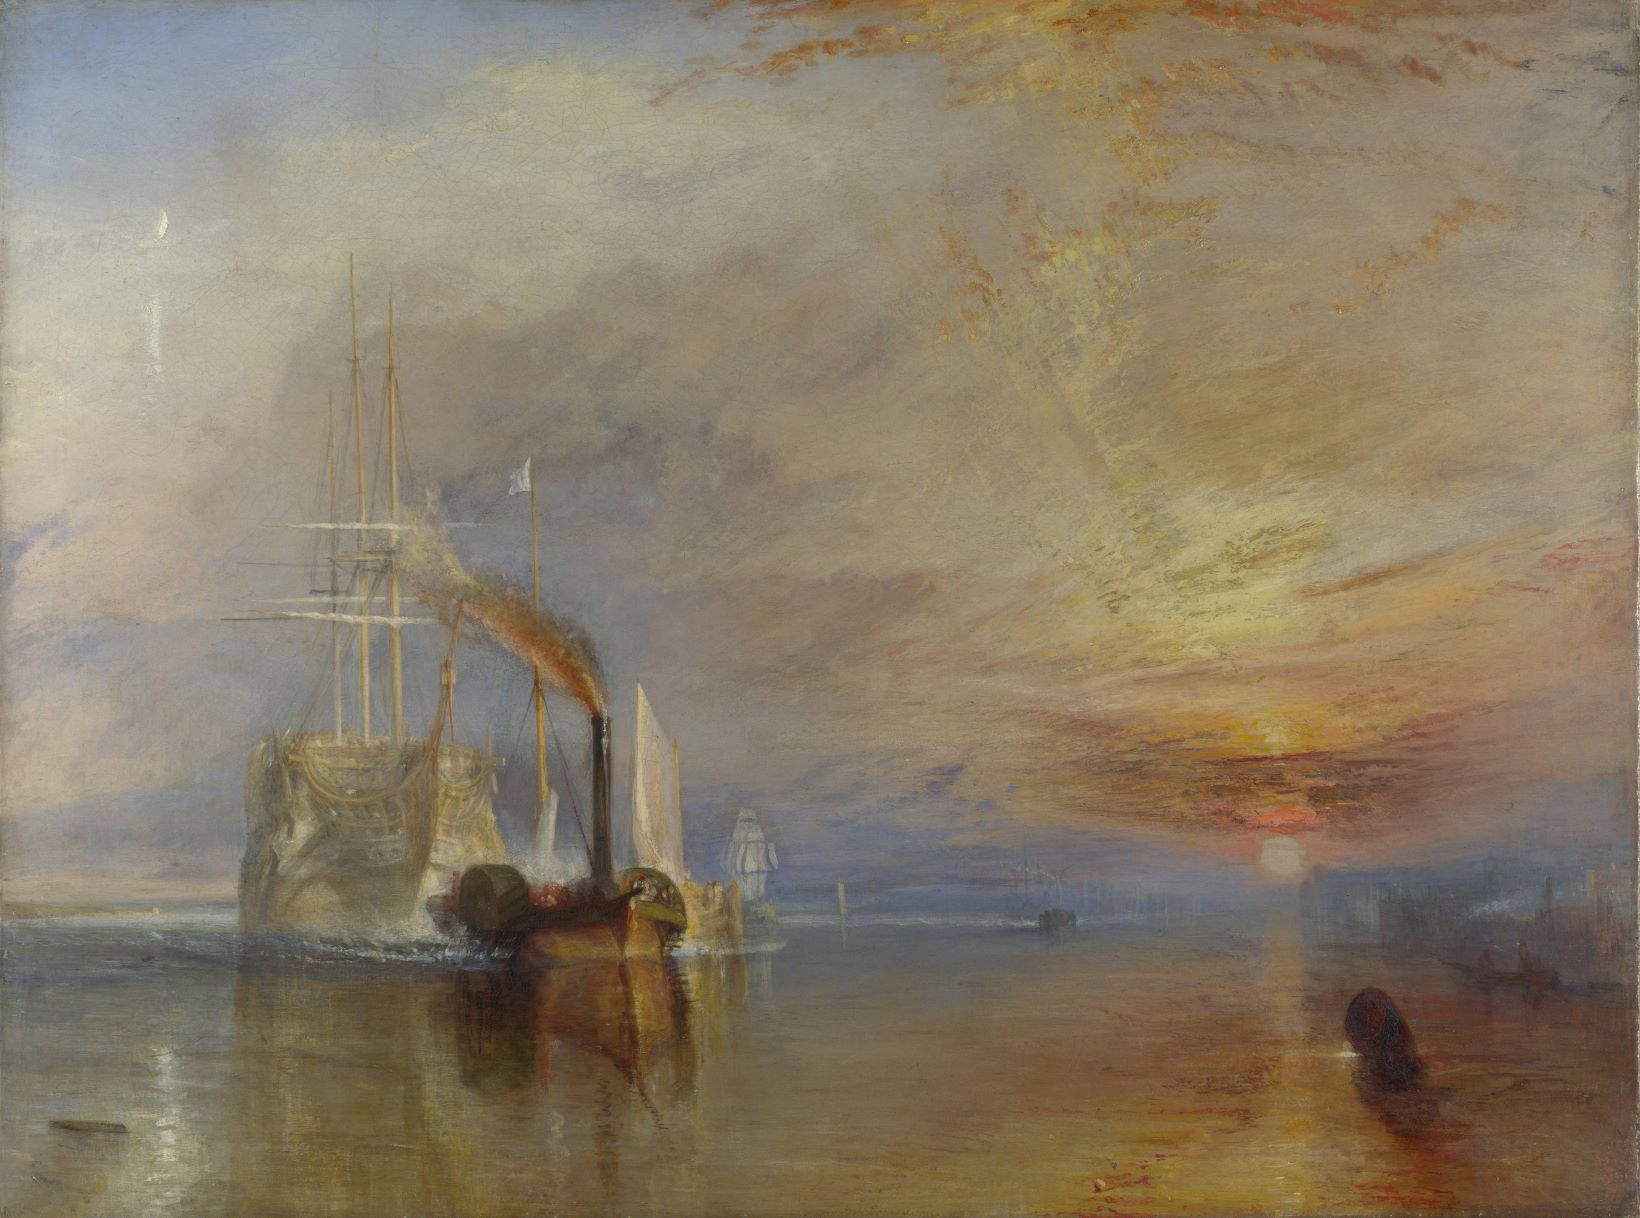 A painting of the fighting temeraire by J. Turner